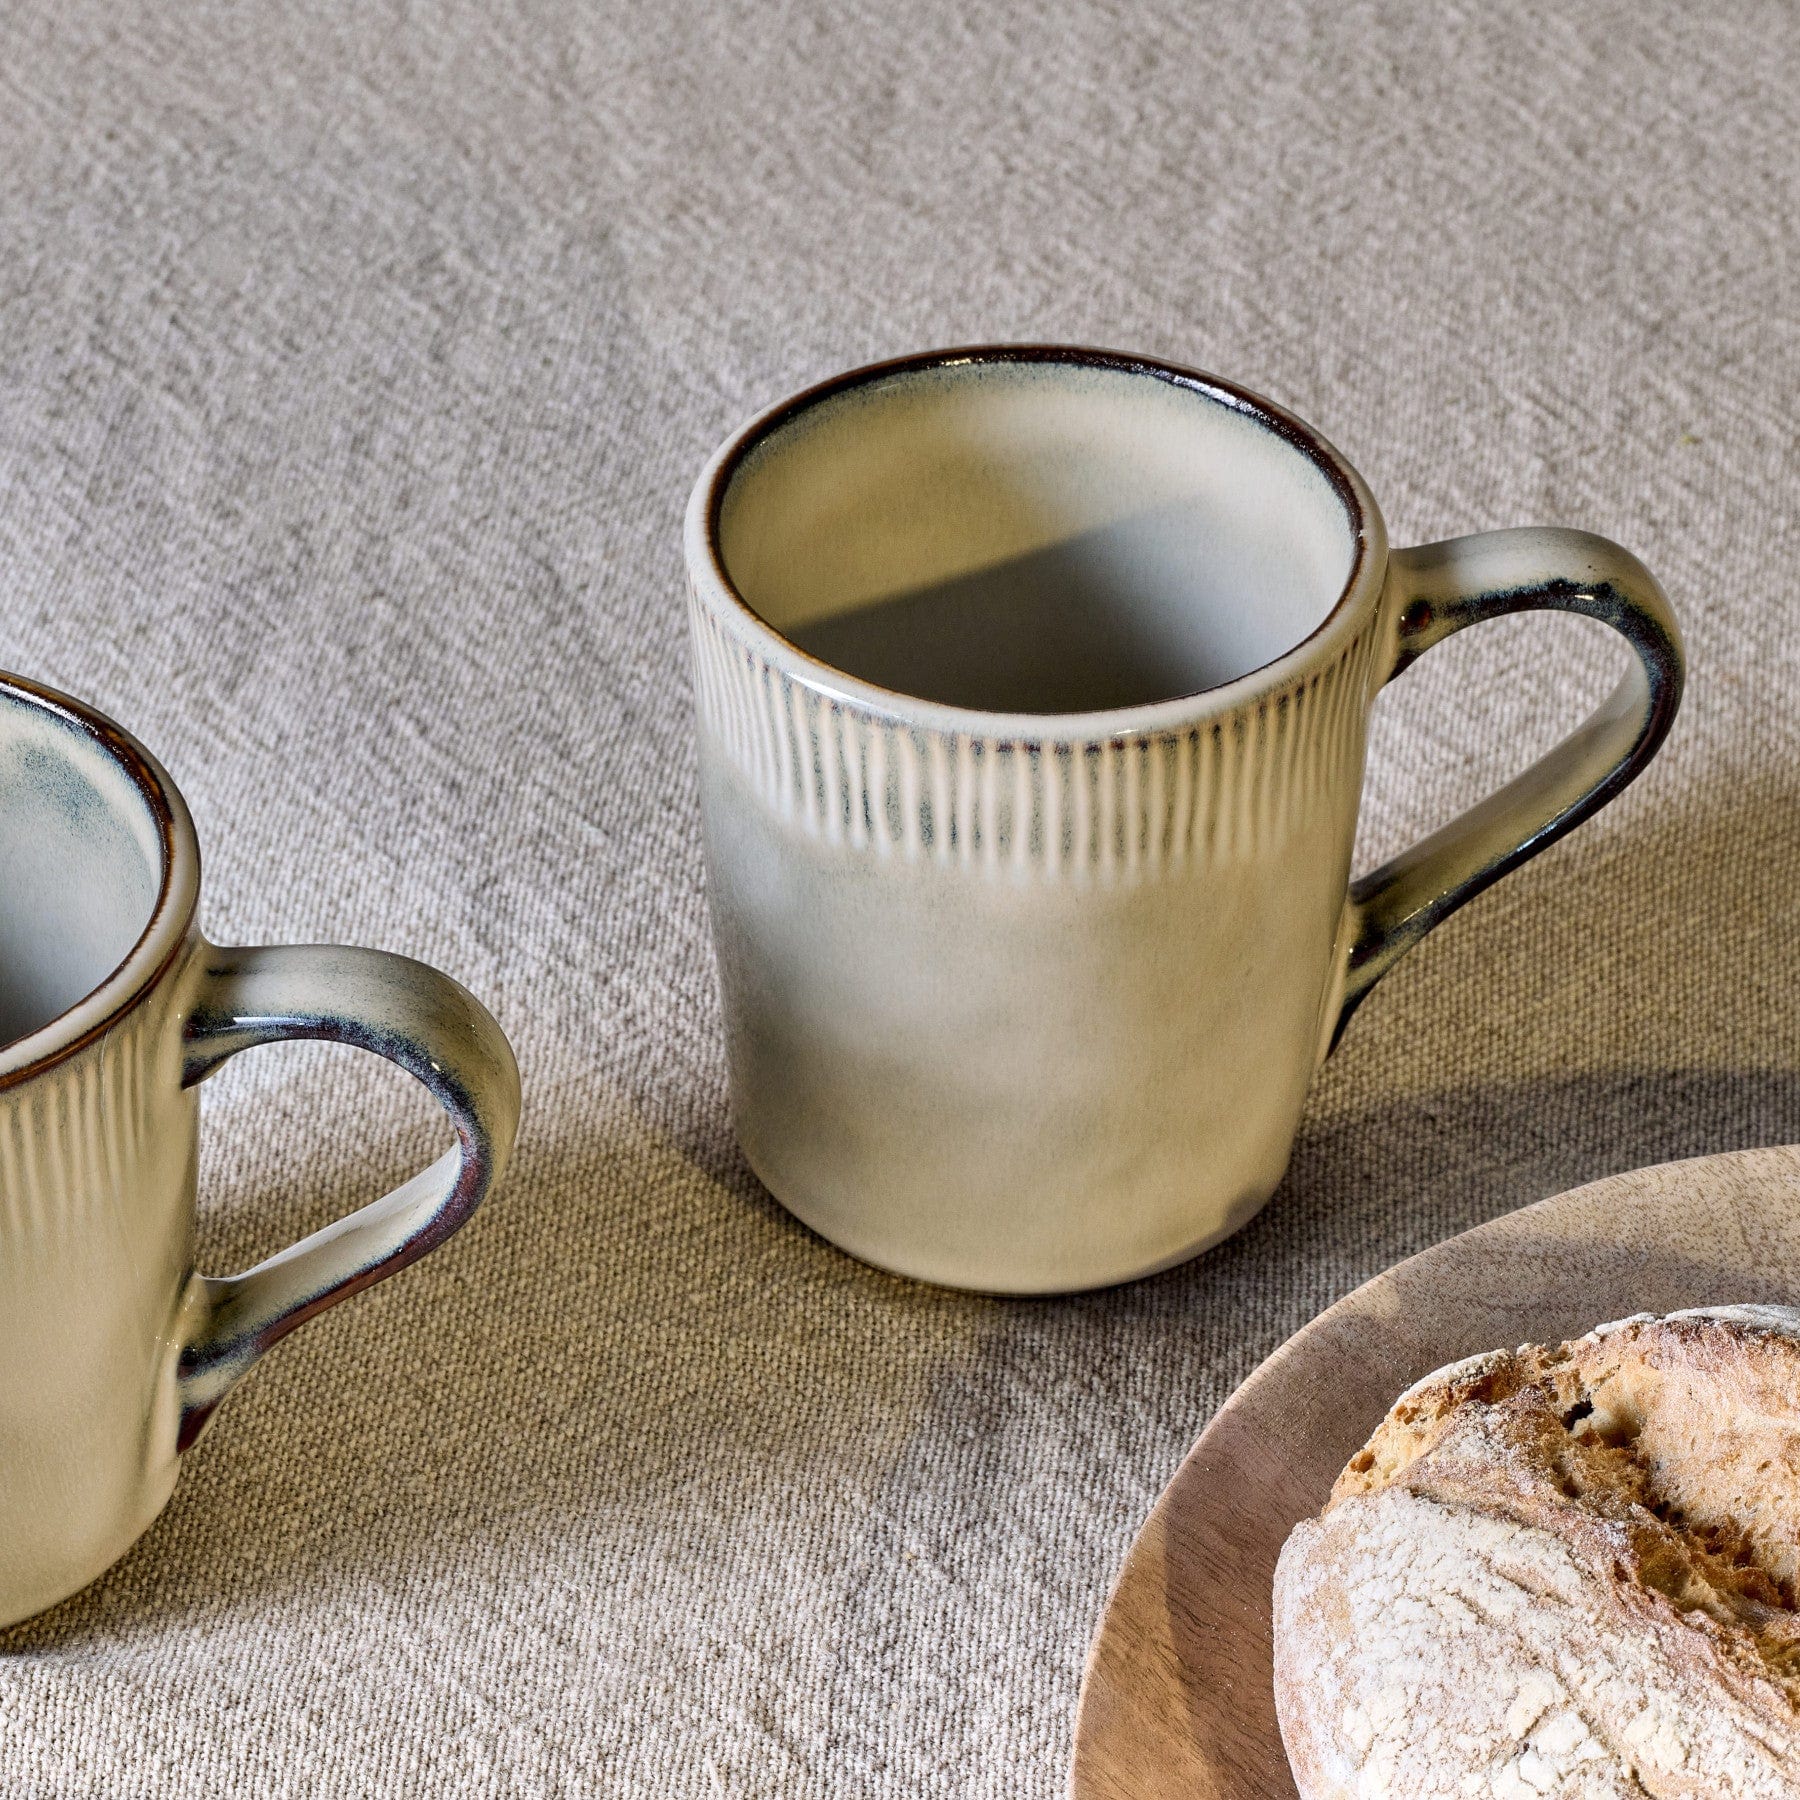 Two ceramic coffee mugs on textured linen tablecloth with rustic homemade bread on wooden plate, cozy breakfast setup, kitchenware, artisanal pottery and bakery concept.